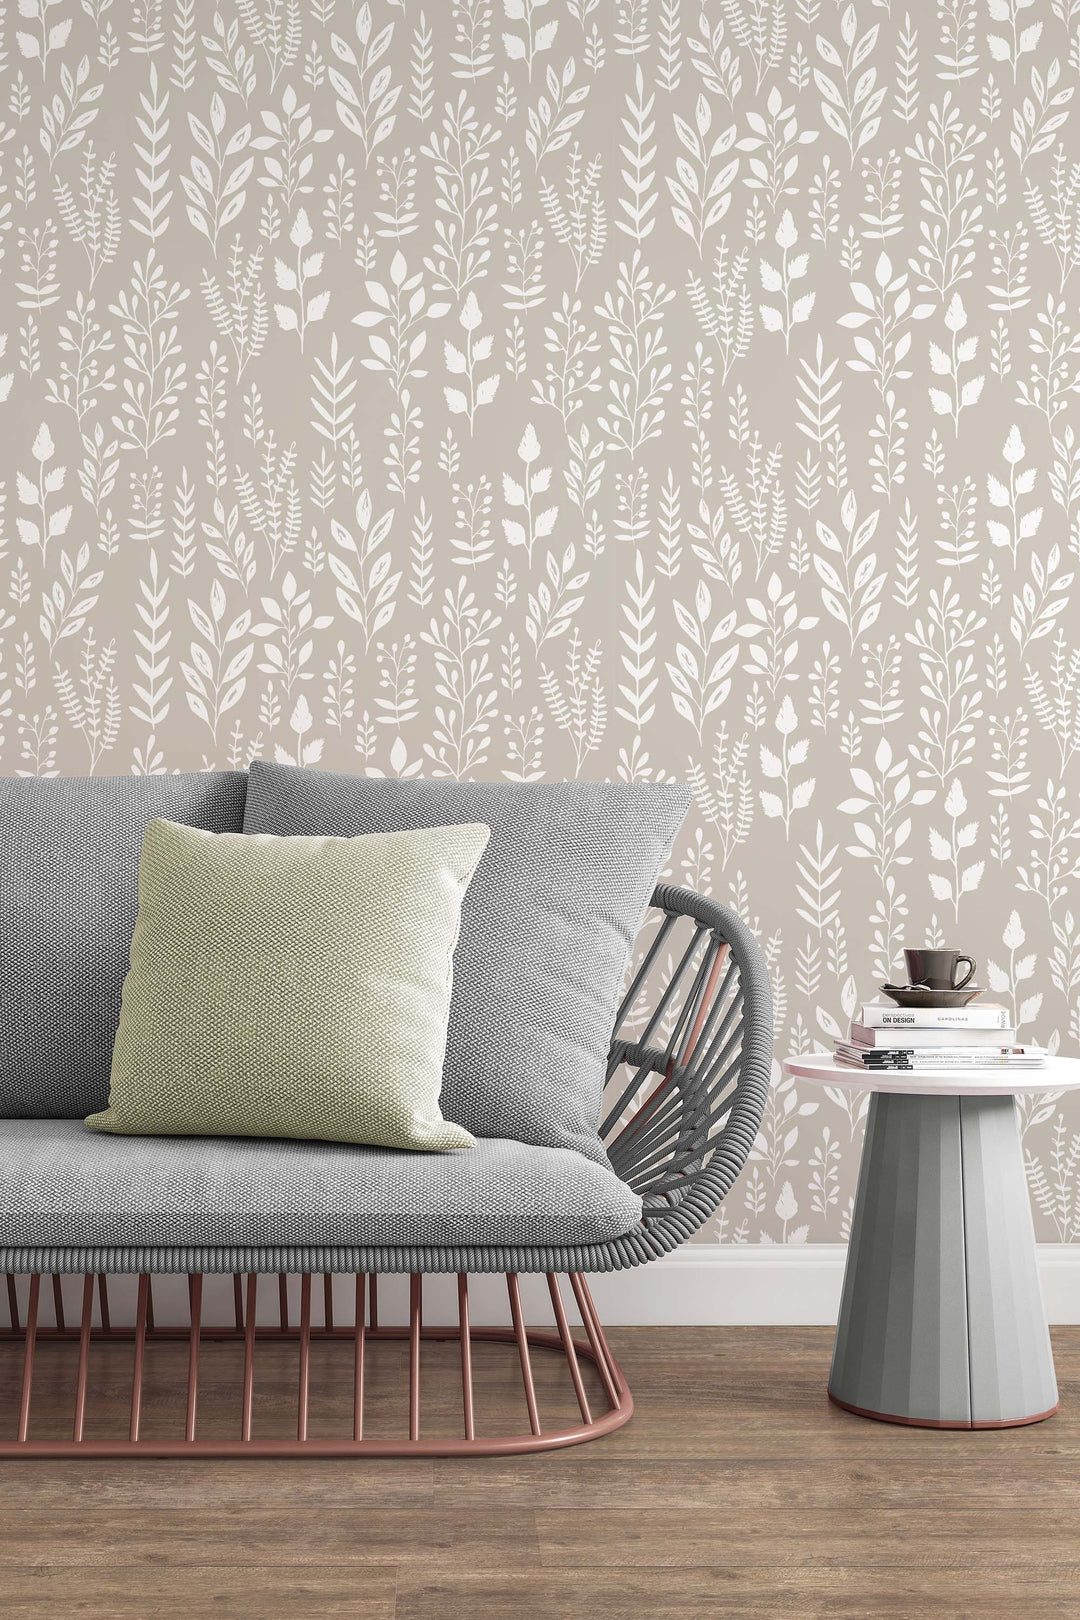 Boho herbs Removable Peel and Stick Wallpaper #53305 /